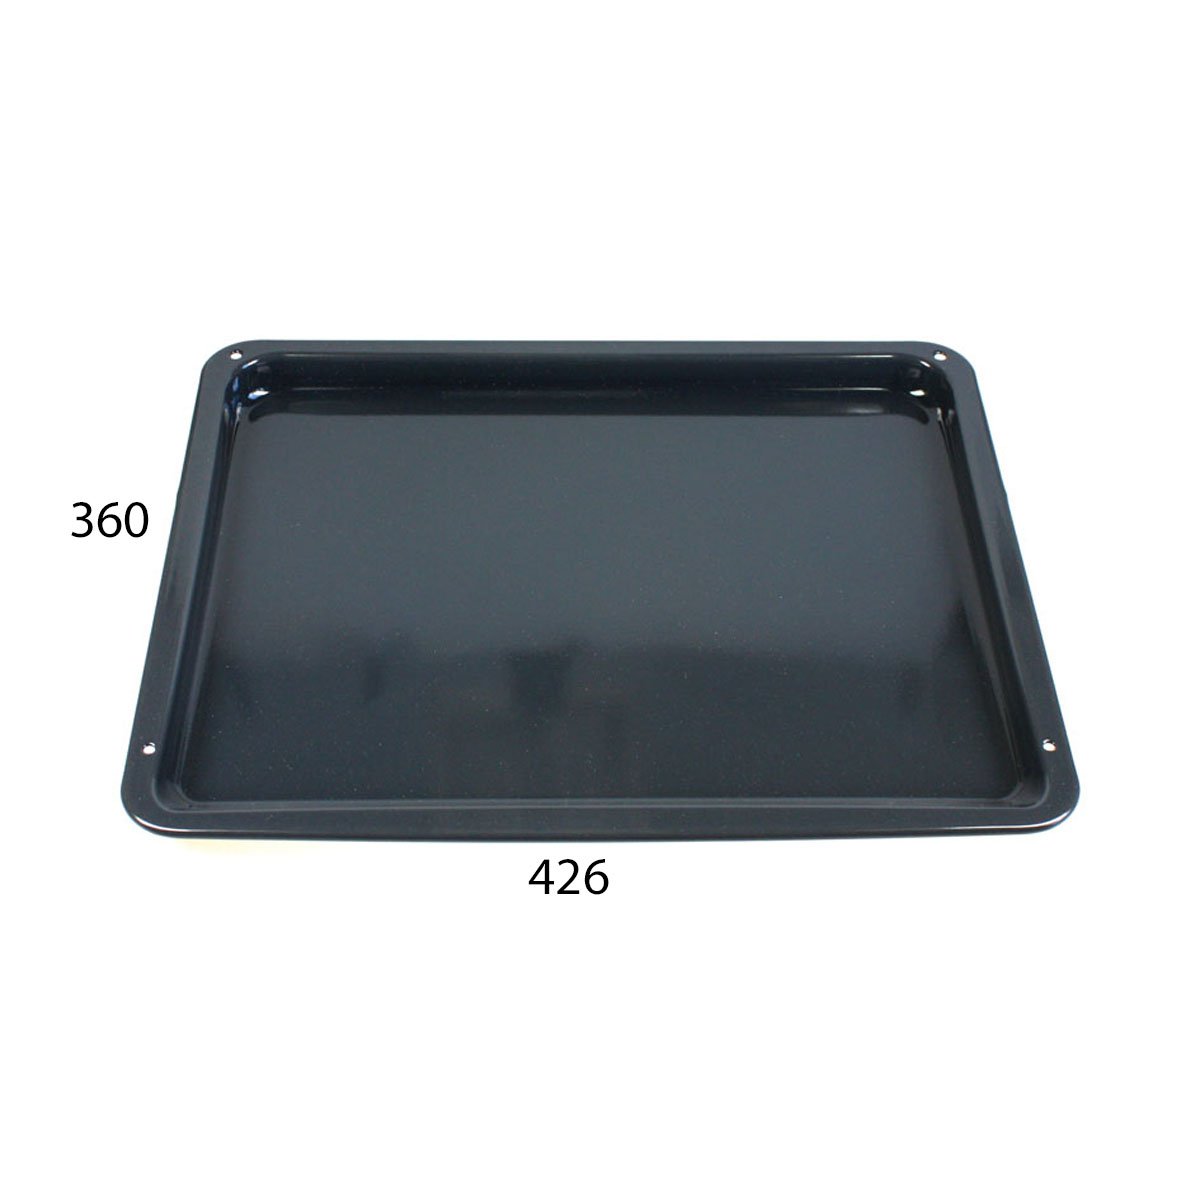 Bakeplate 426 x 360 x 23 mm.